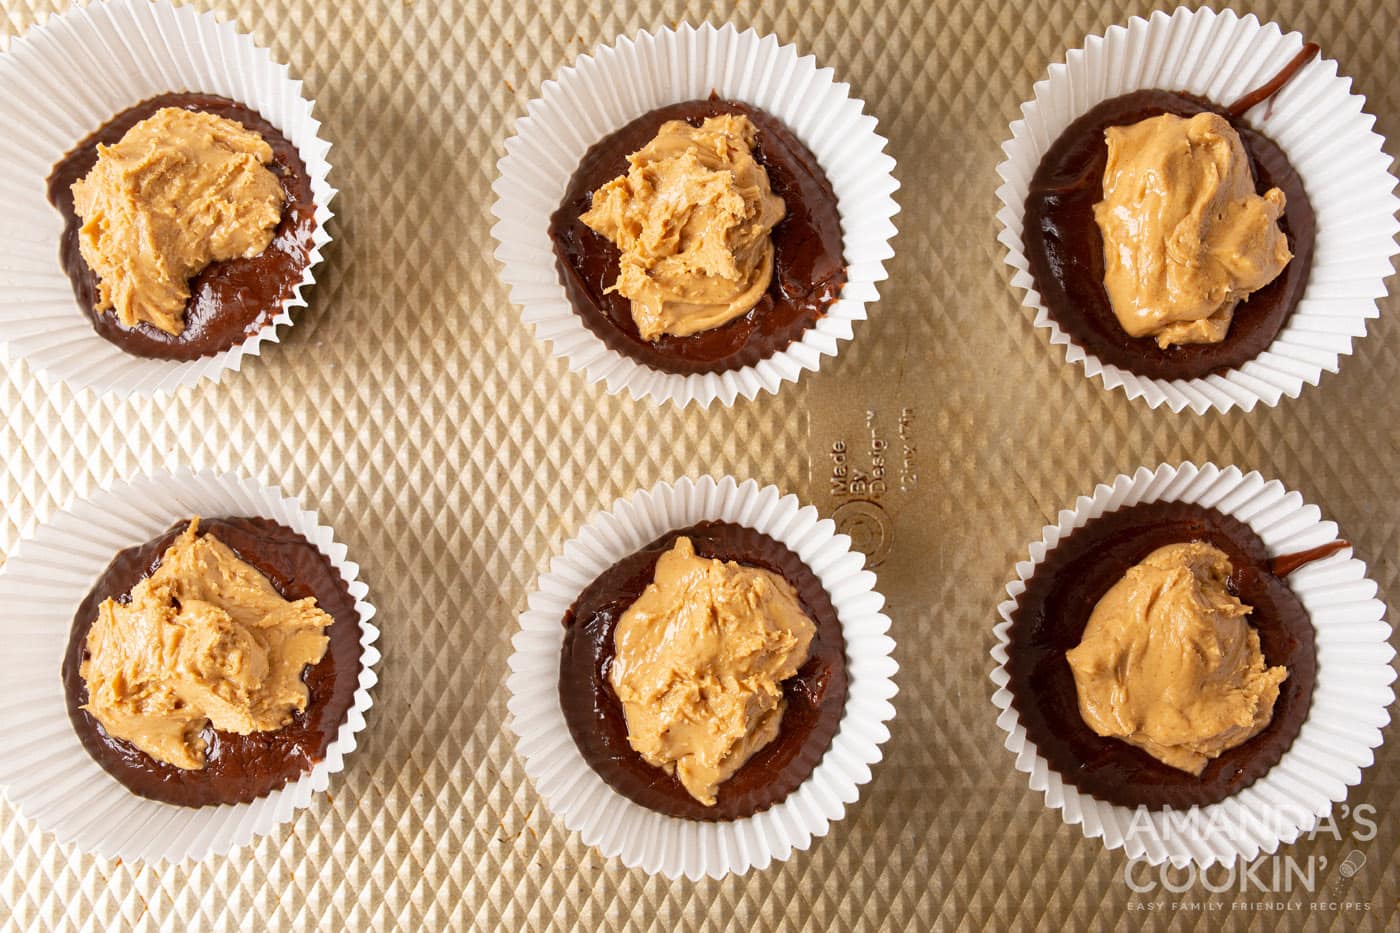 peanut butter on top of chocolate in a cupcake liner